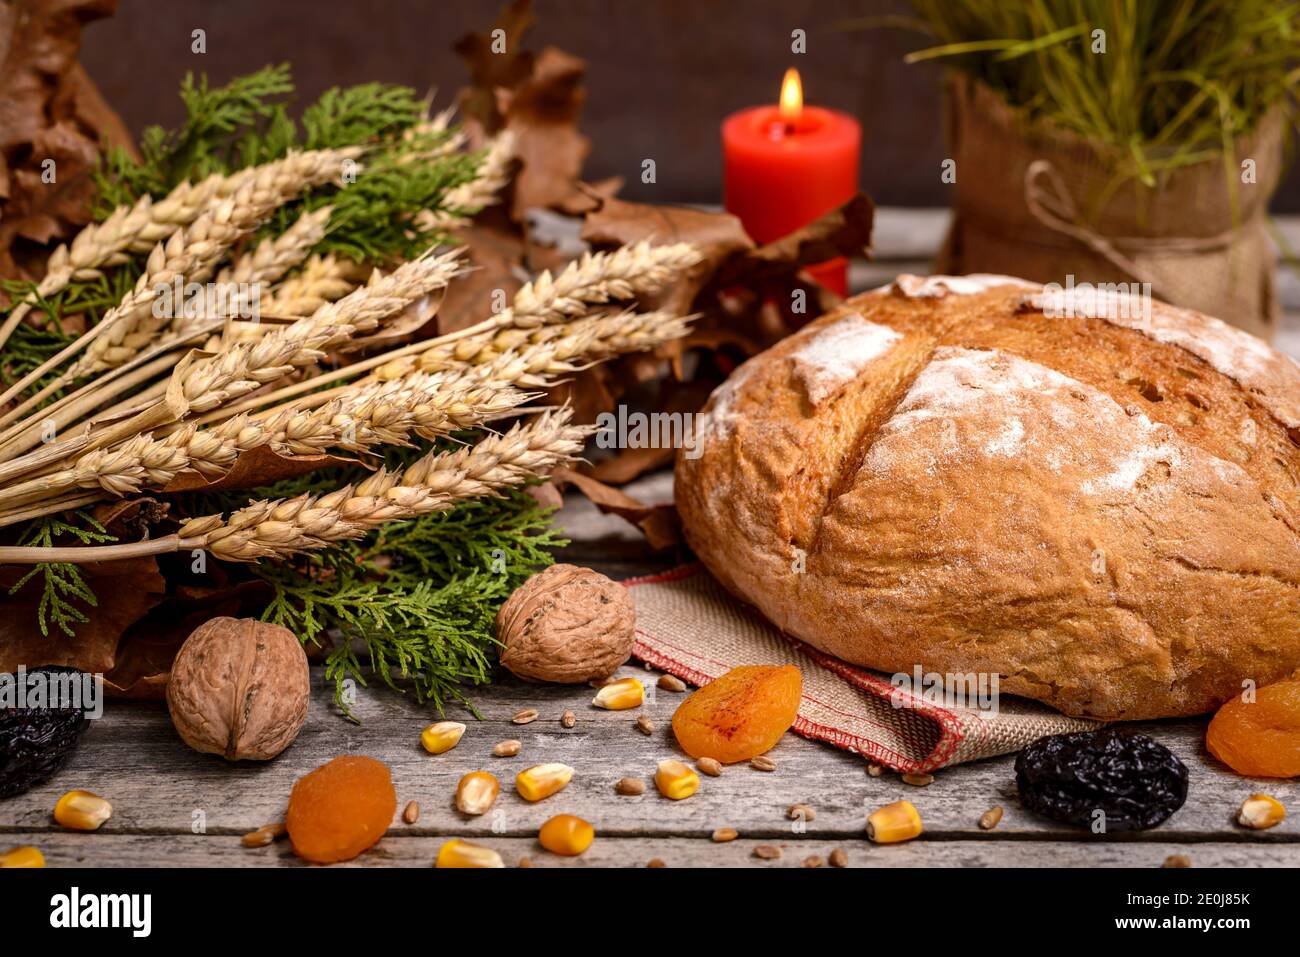 Traditional food for orthodox Christmas eve. Yule log or badnjak, bread, cereals, dried fruits and burning candle on wooden table. Concept celebration Stock Photo